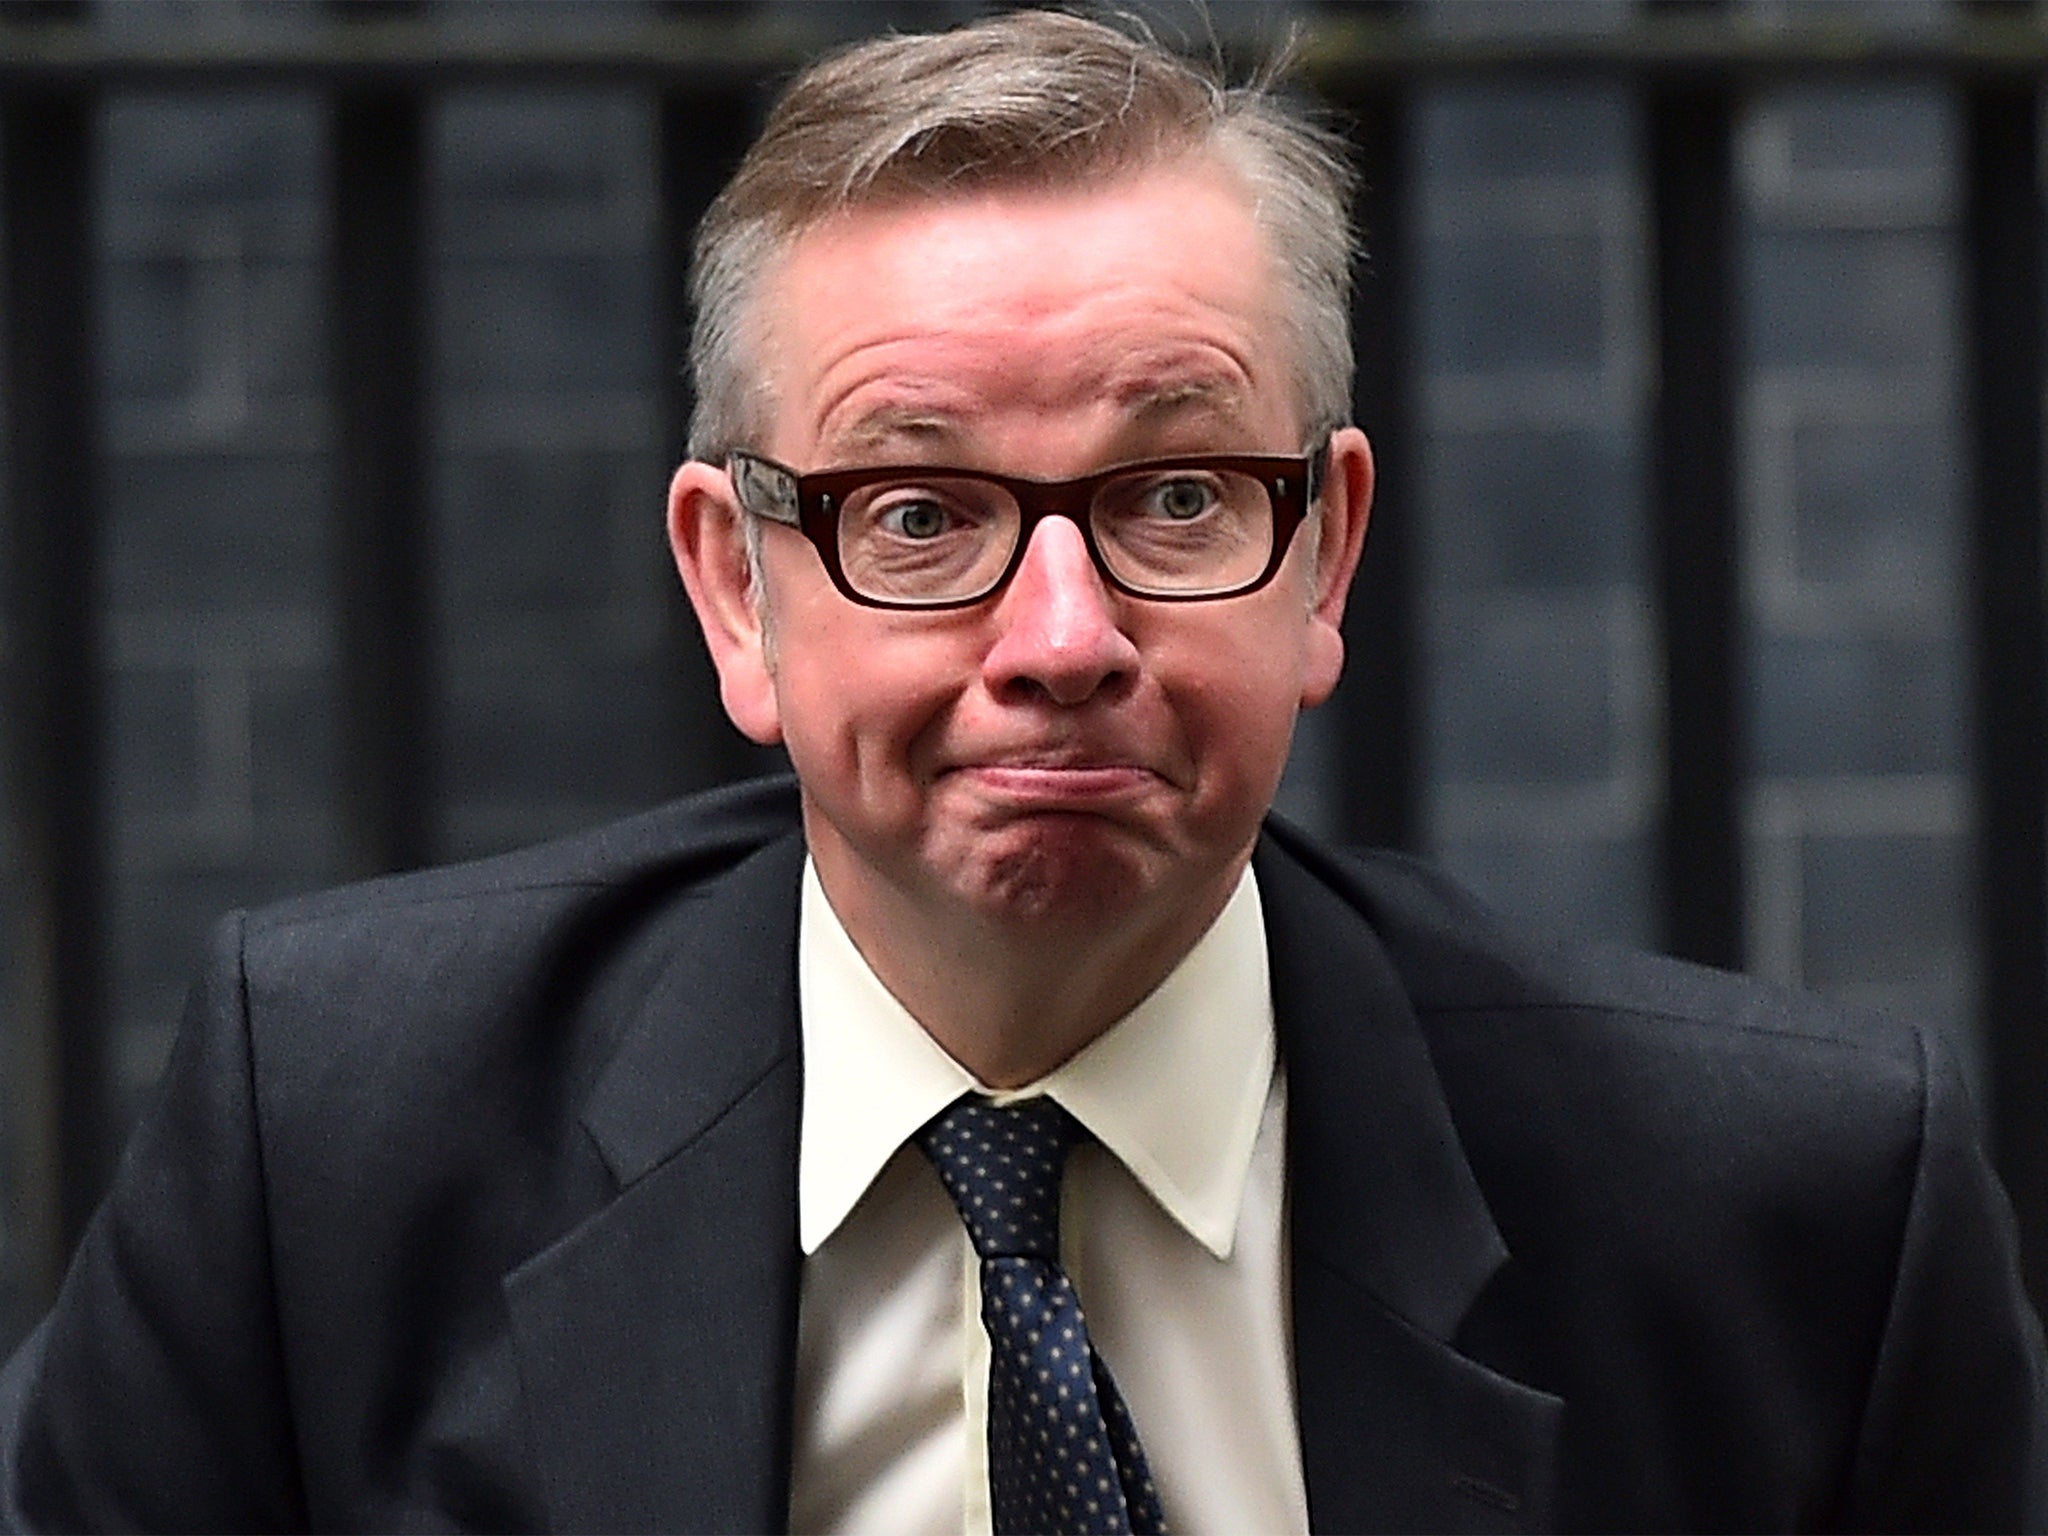 Michael Gove: "Does this face look bovvered?"